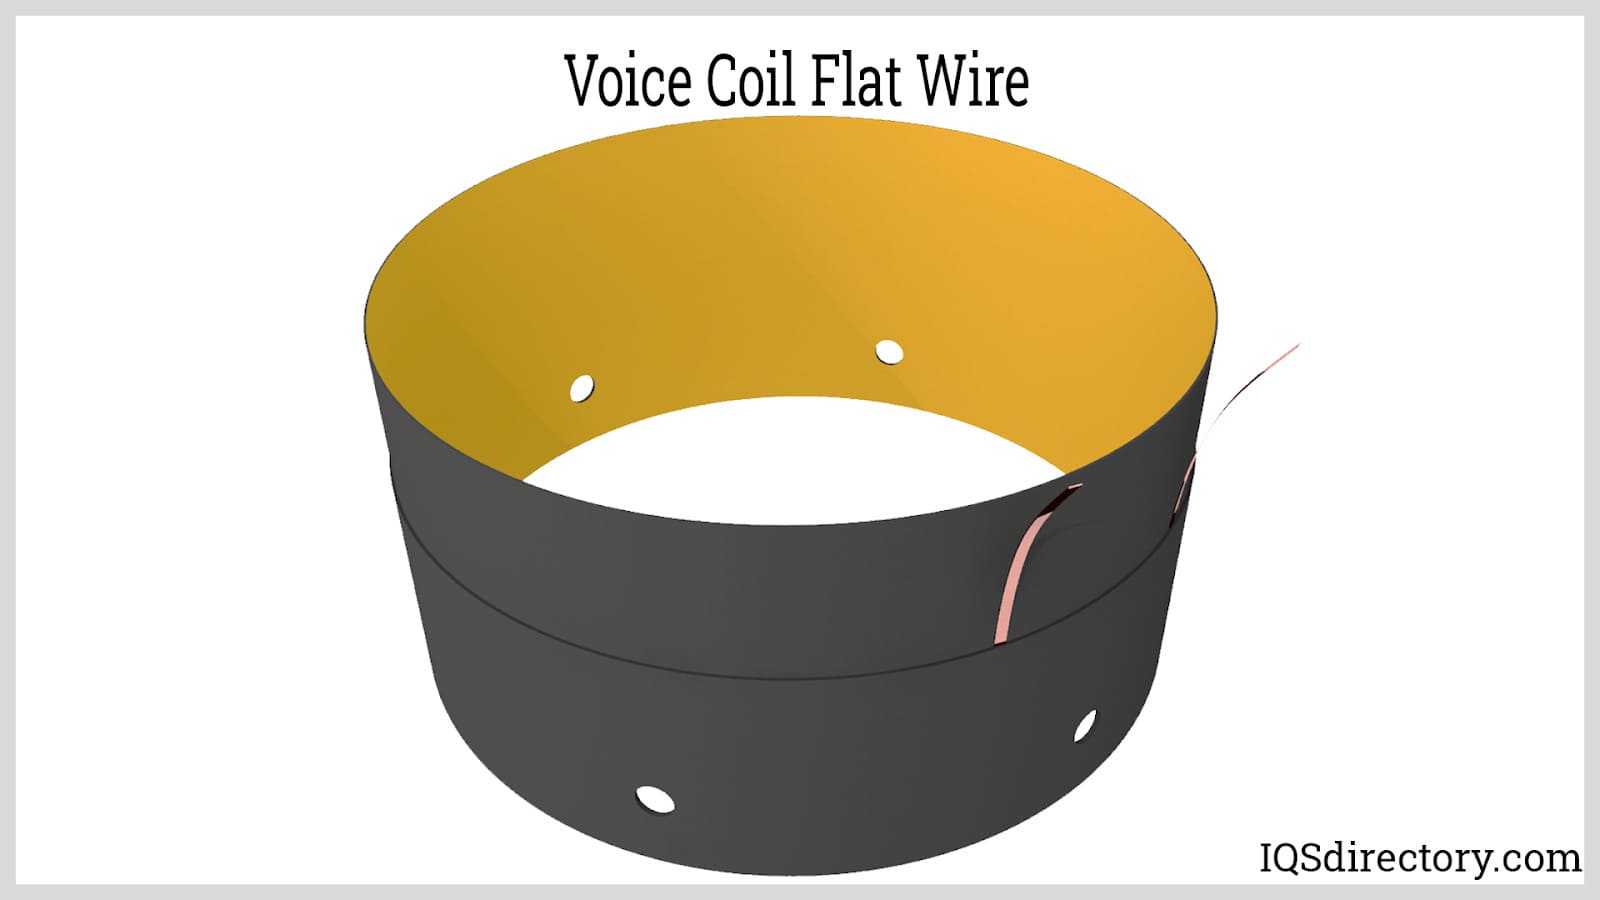 Voice Coil Flat Wire